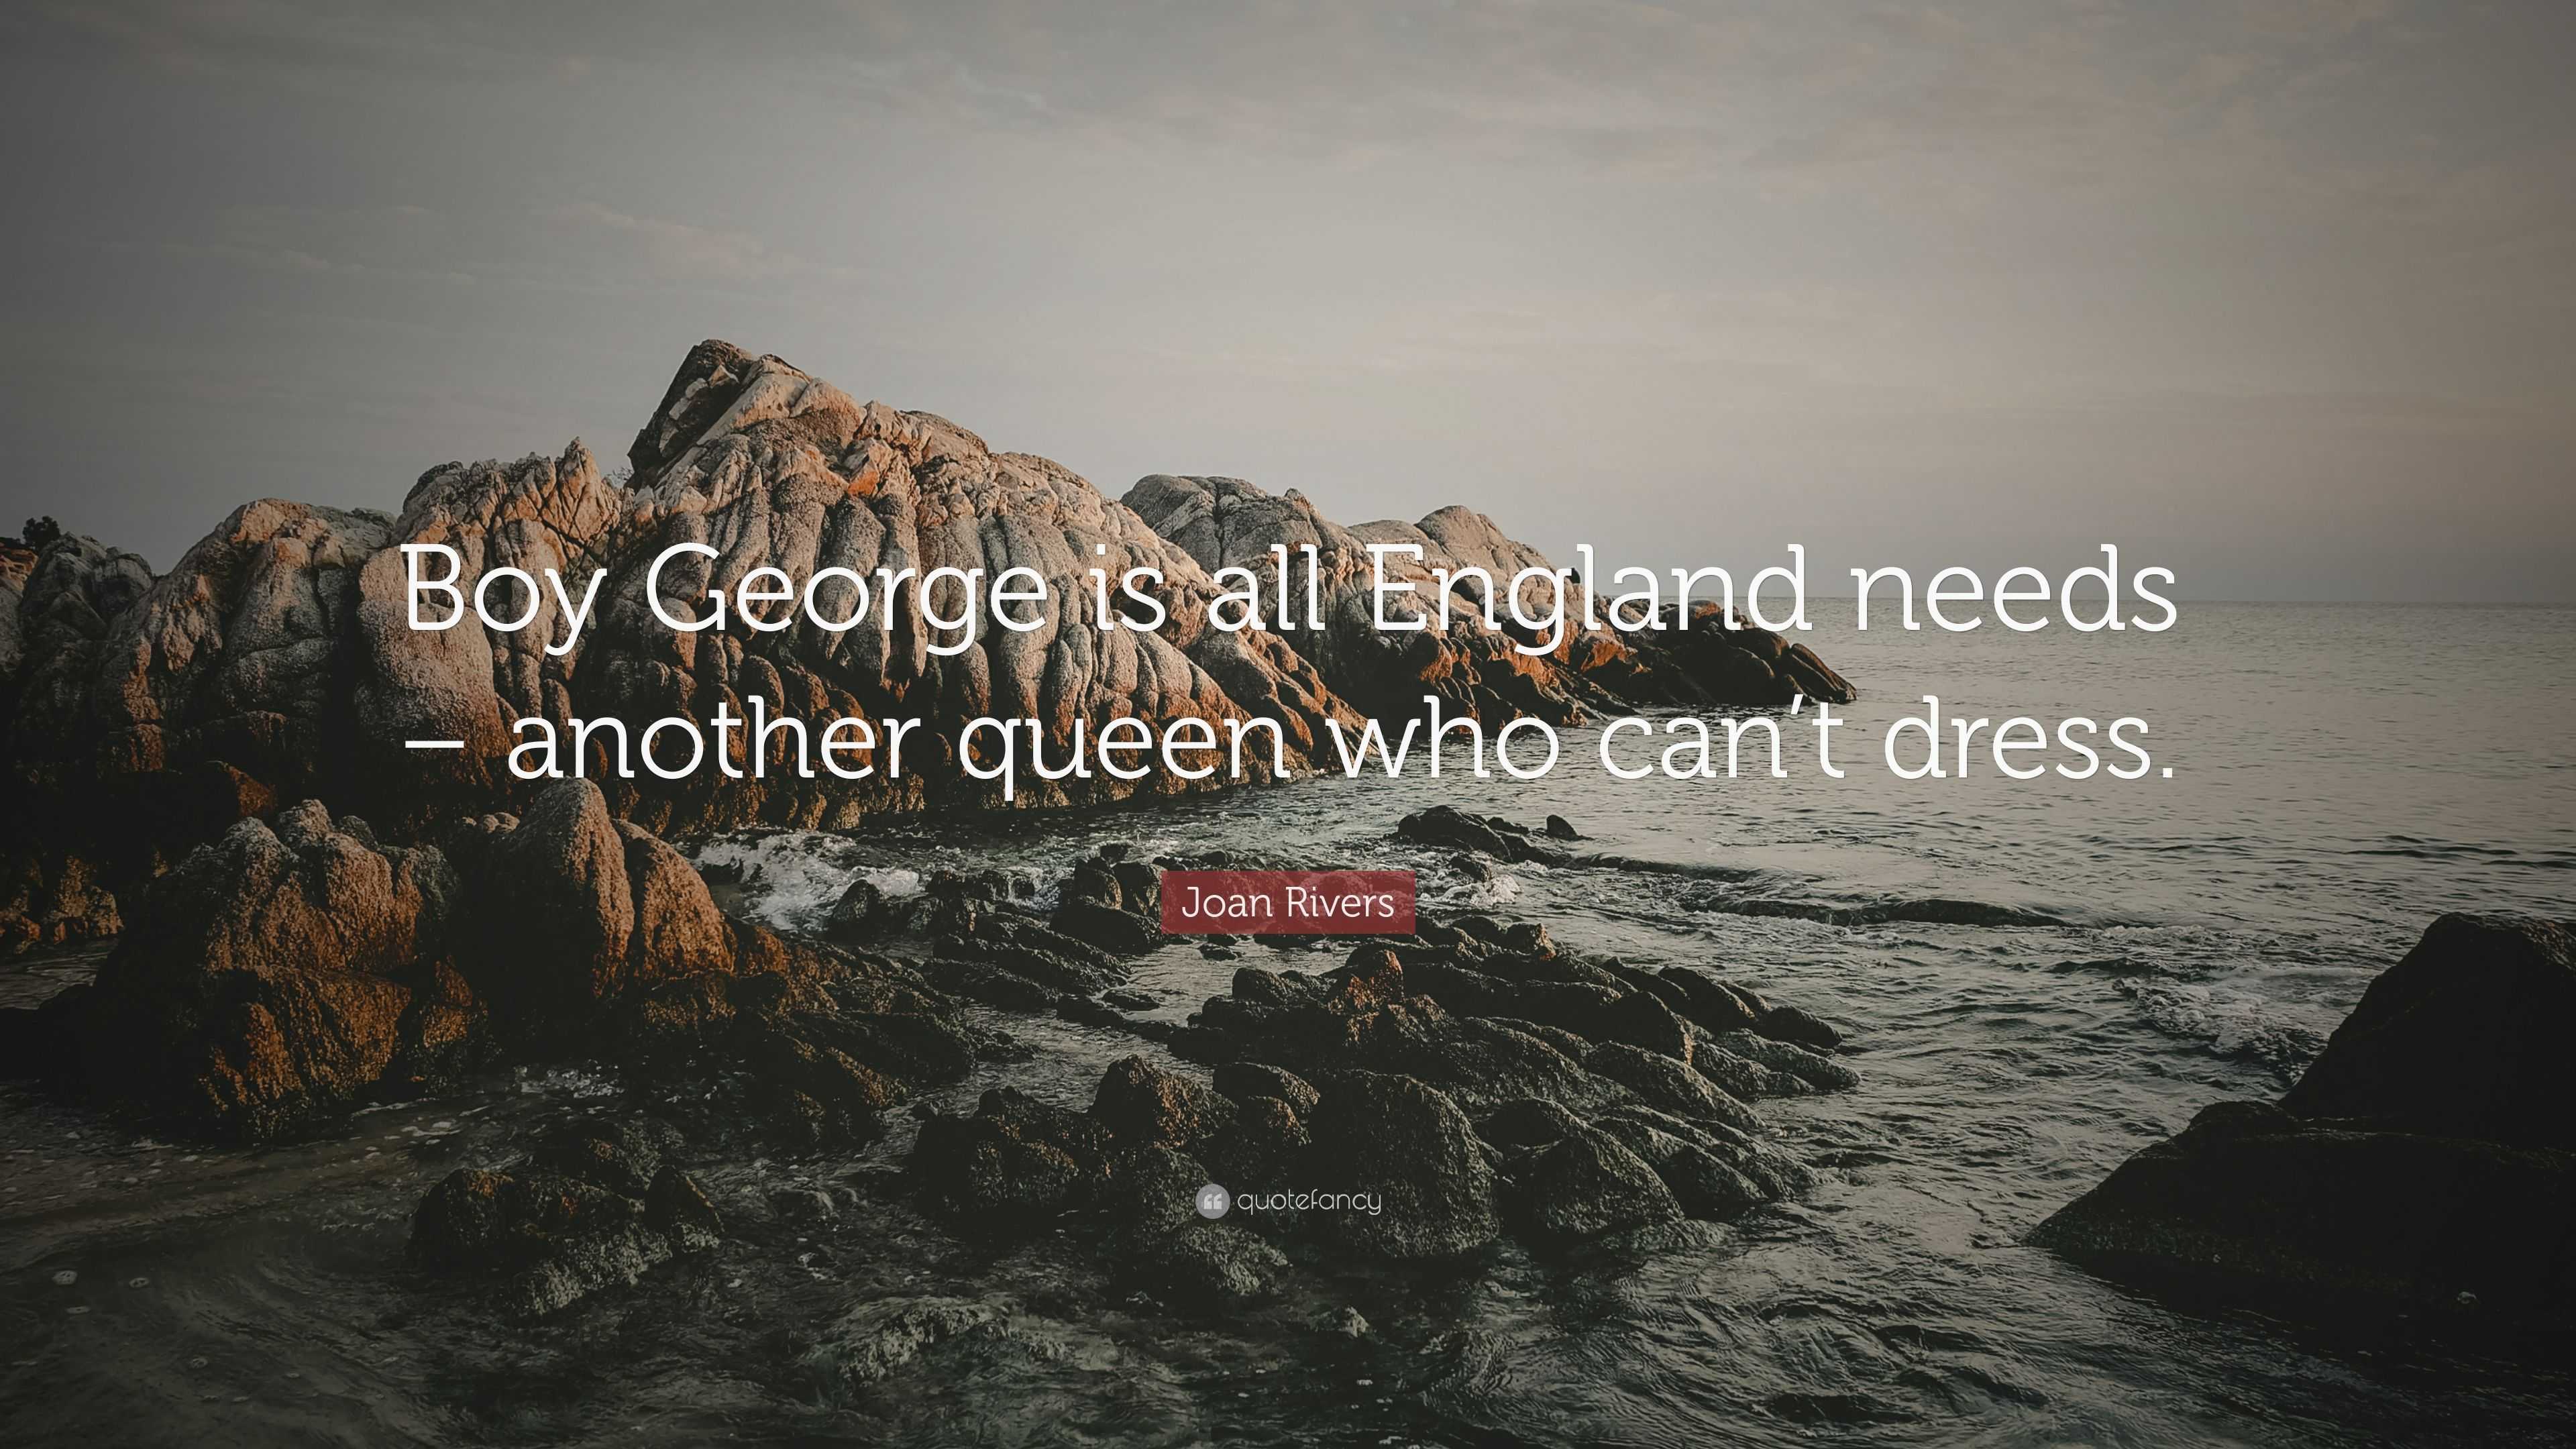 Joan Rivers Quote: “Boy George is all England needs – another queen who  can't